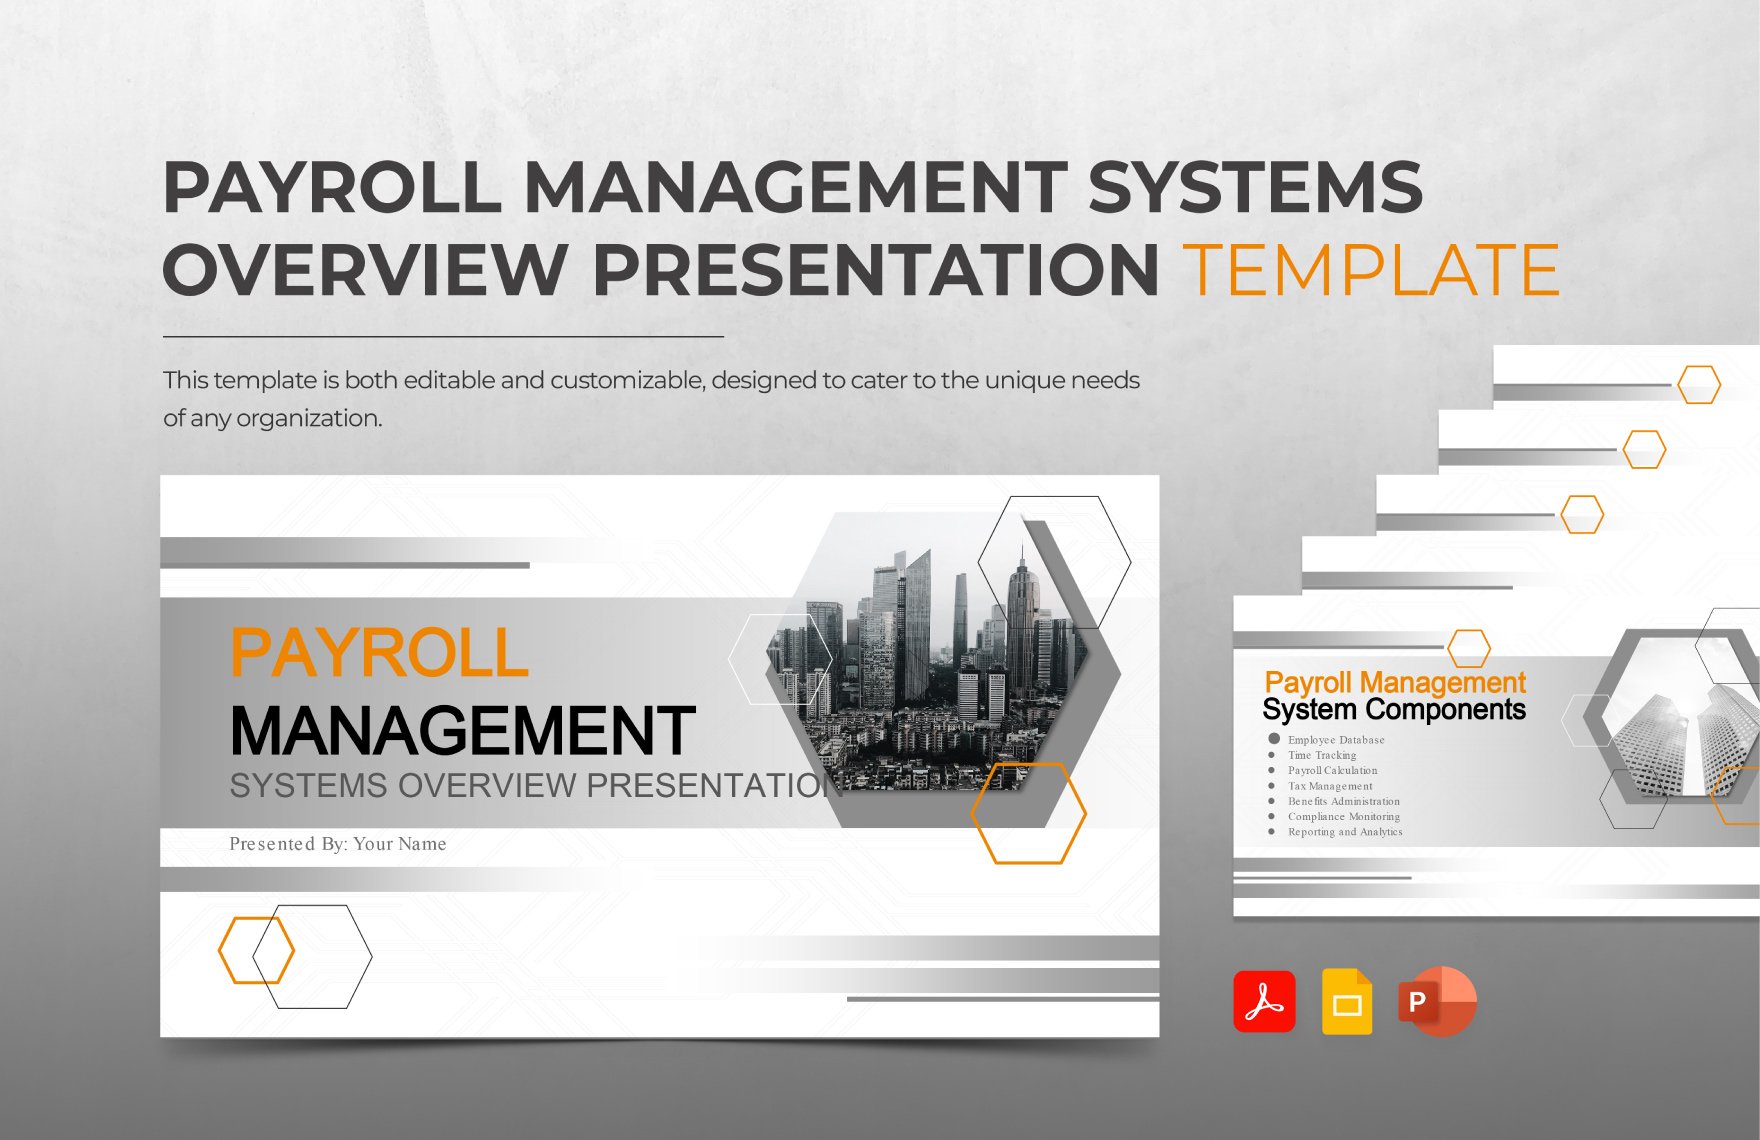 Free Payroll Management Systems Overview Presentation Template in PDF, PowerPoint, Google Slides